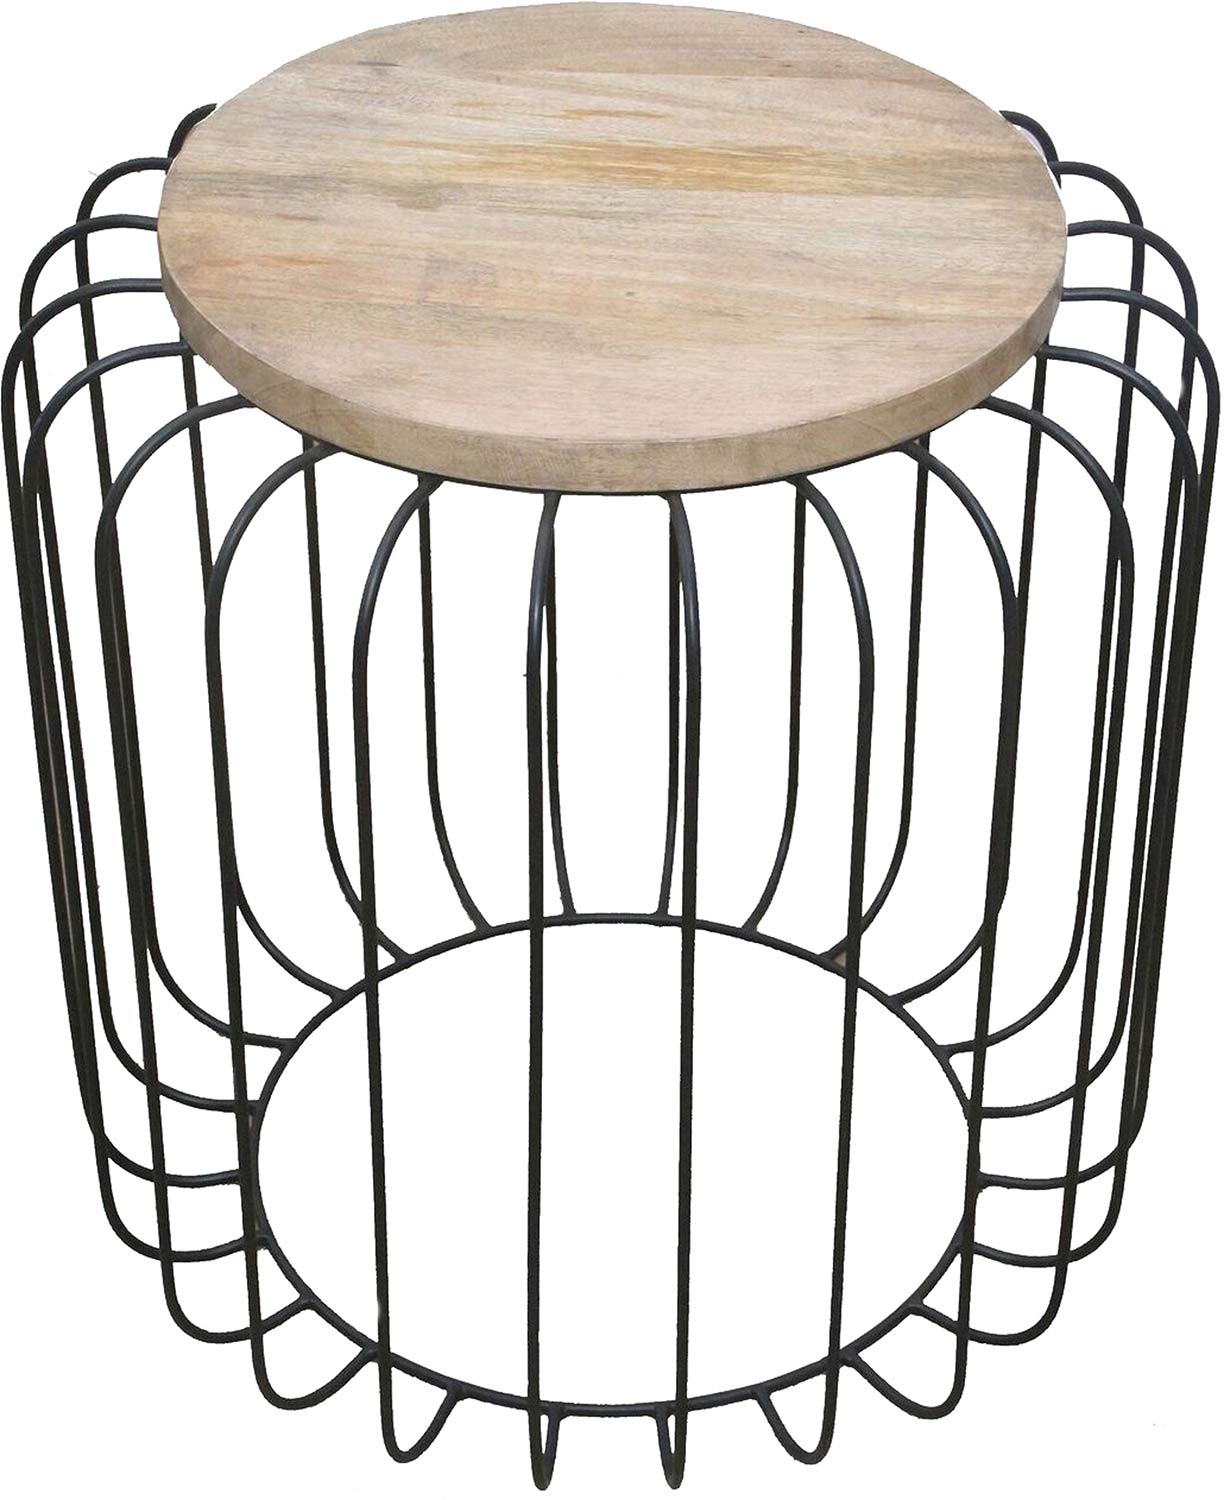 Ren-Wil Bronson Accent Table Stool - Natural/Black